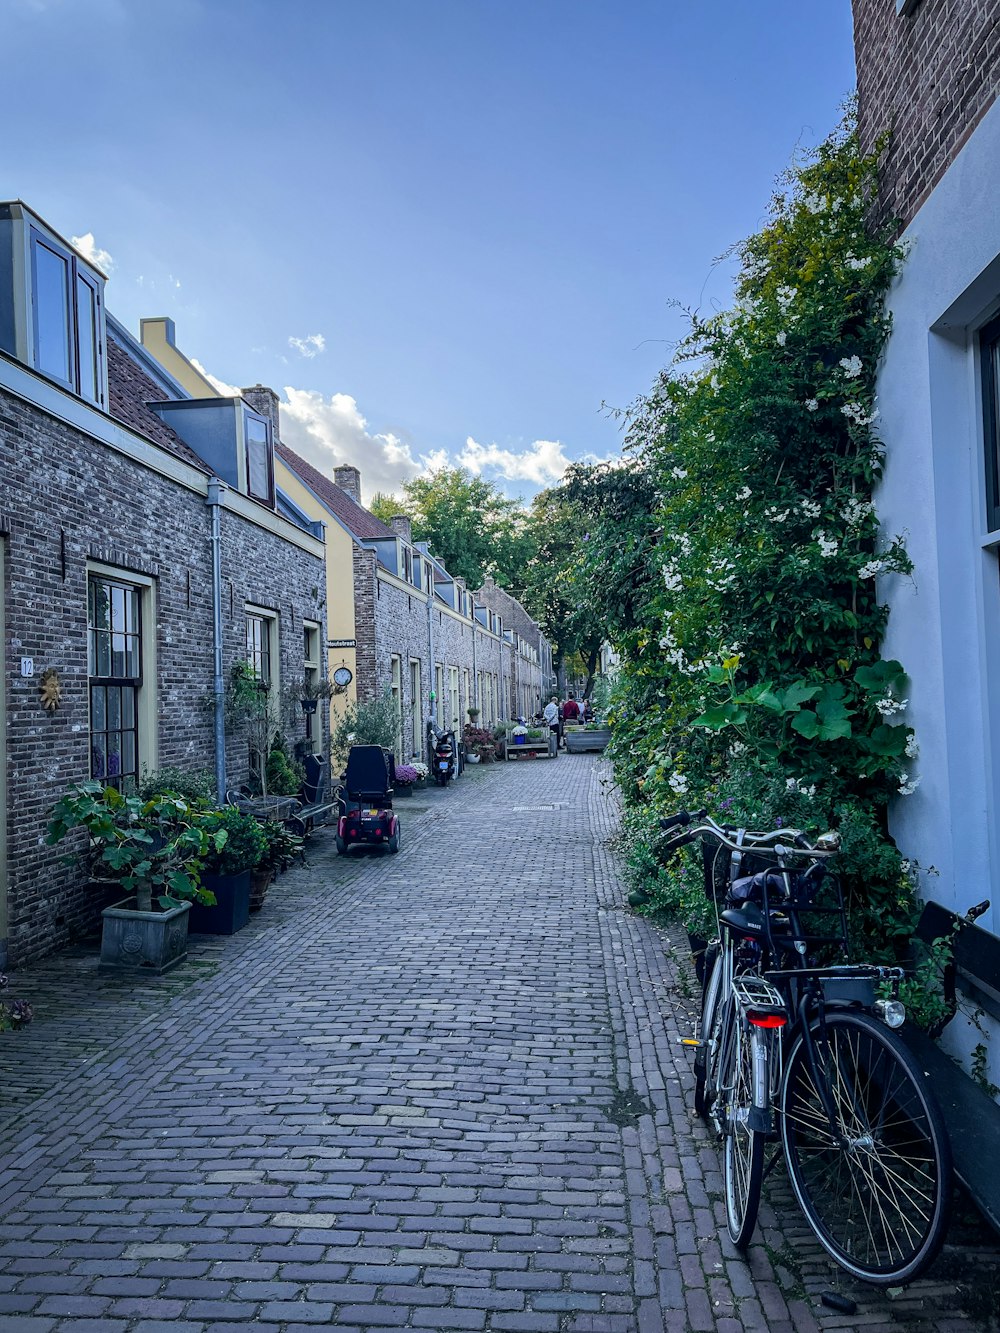 a brick road with bicycles parked on it and buildings on the side